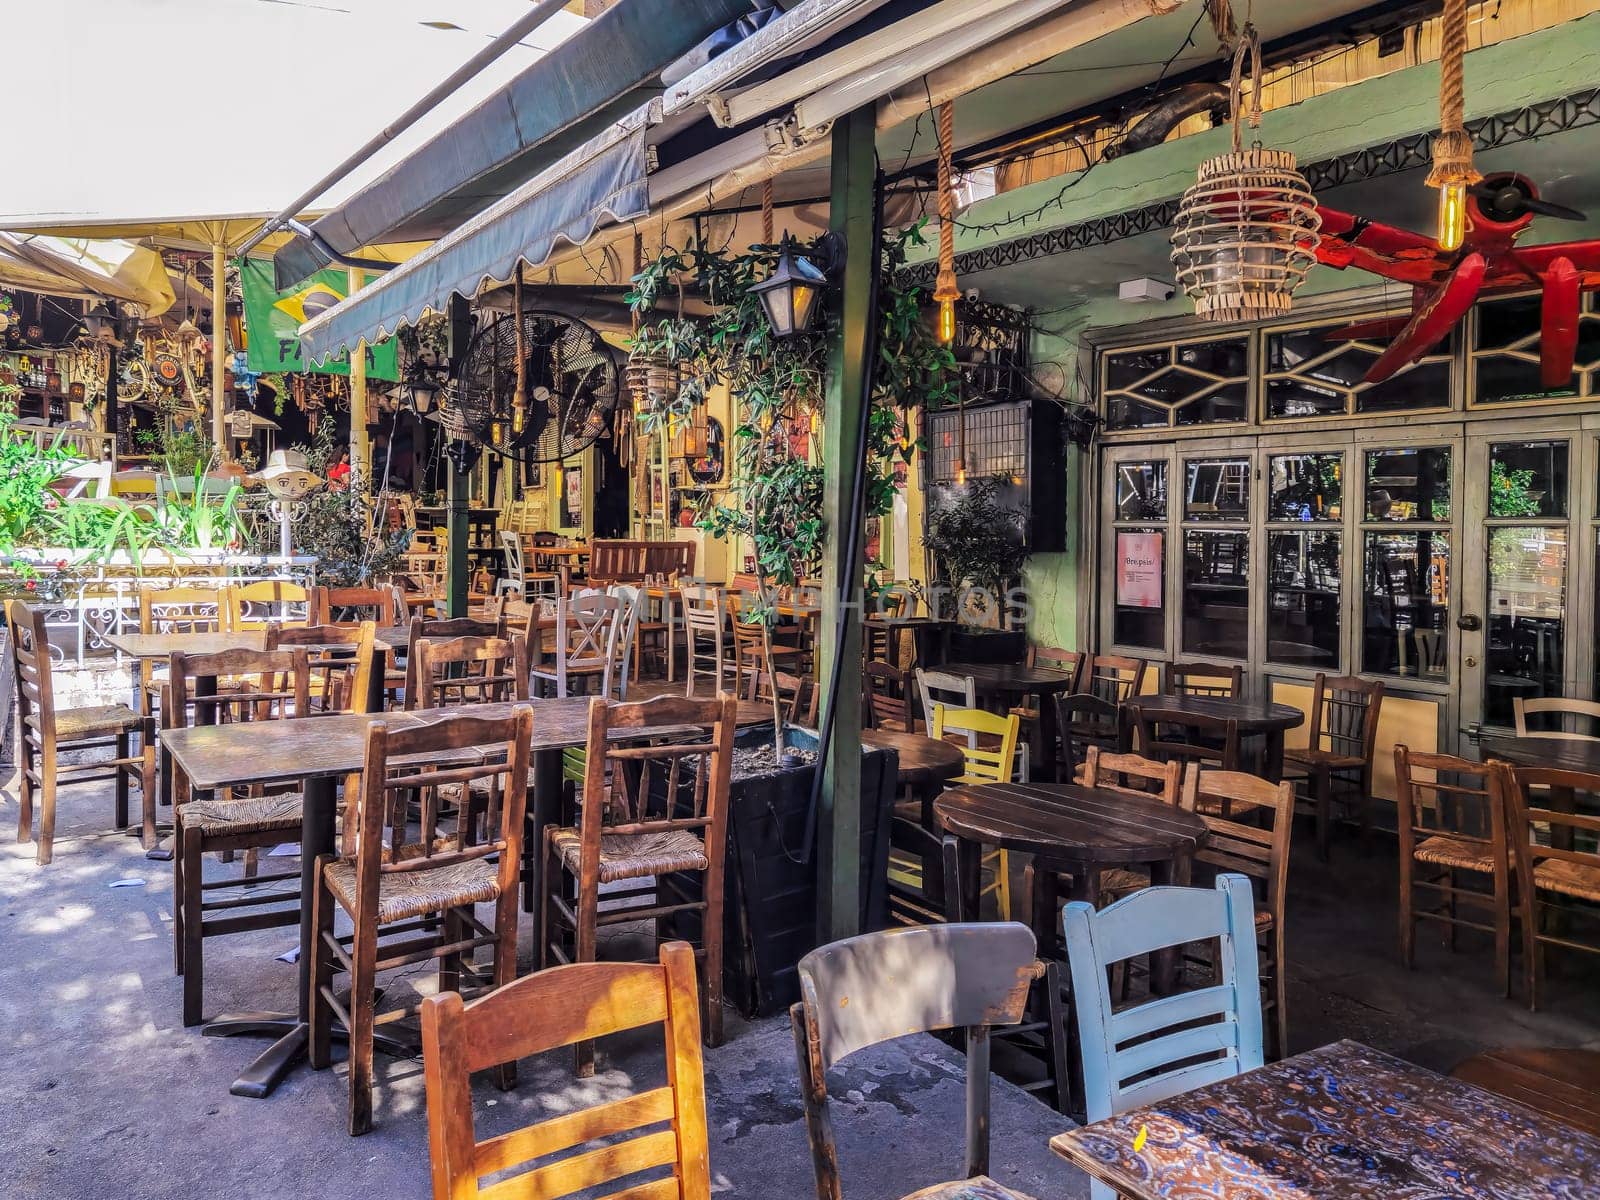 Thessaloniki, Greece - June 30 2023: Day view of the empty traditional outdoor seating area of taverns with colorful chairs, tables and vintage decoration at the historic Bit Bazaar area.